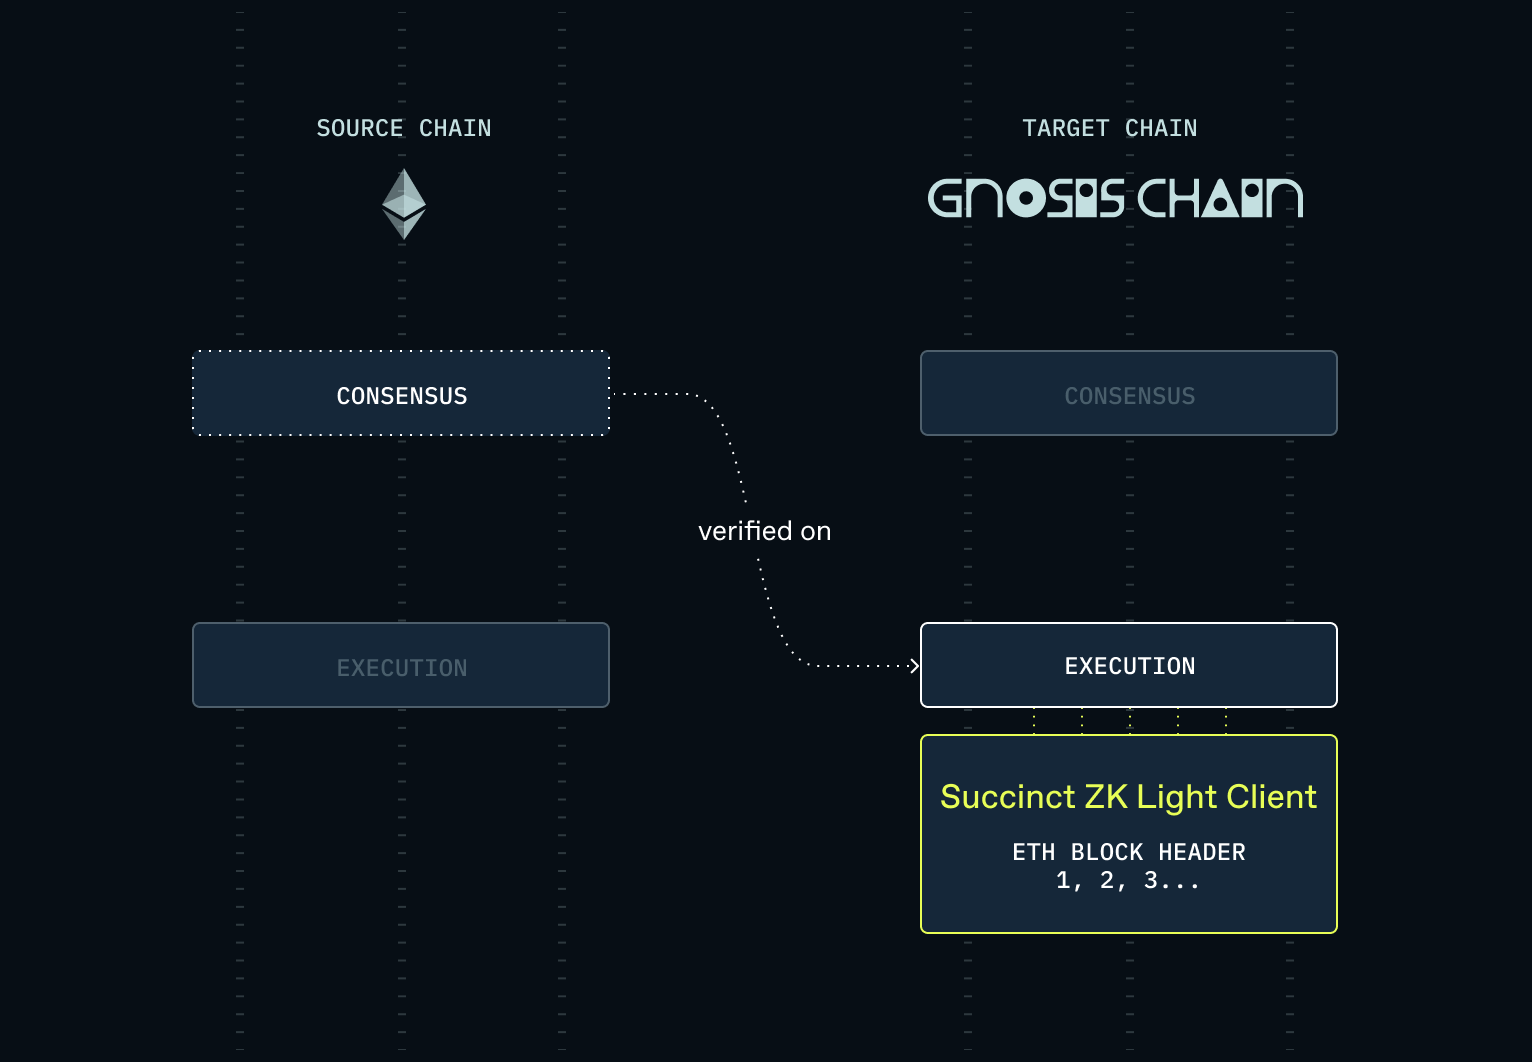 Securing $40M+ TVL on Gnosis Chain with Succinct's Ethereum ZK Light Client